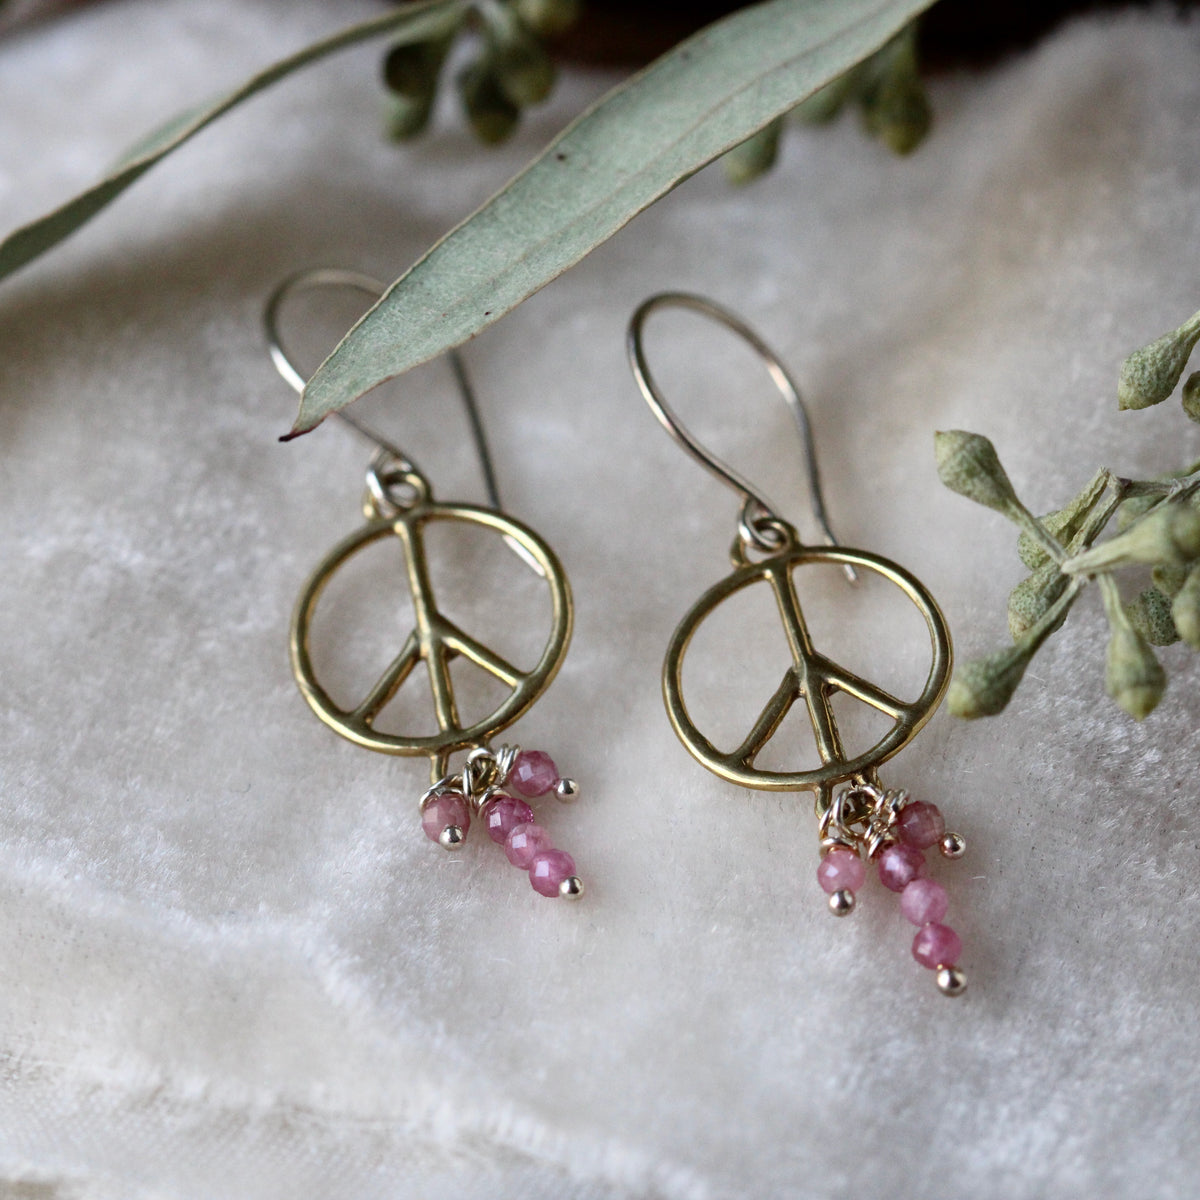 Clearance Sale Bronze Peace symbol dangle earrings sterling and pink tourmaline